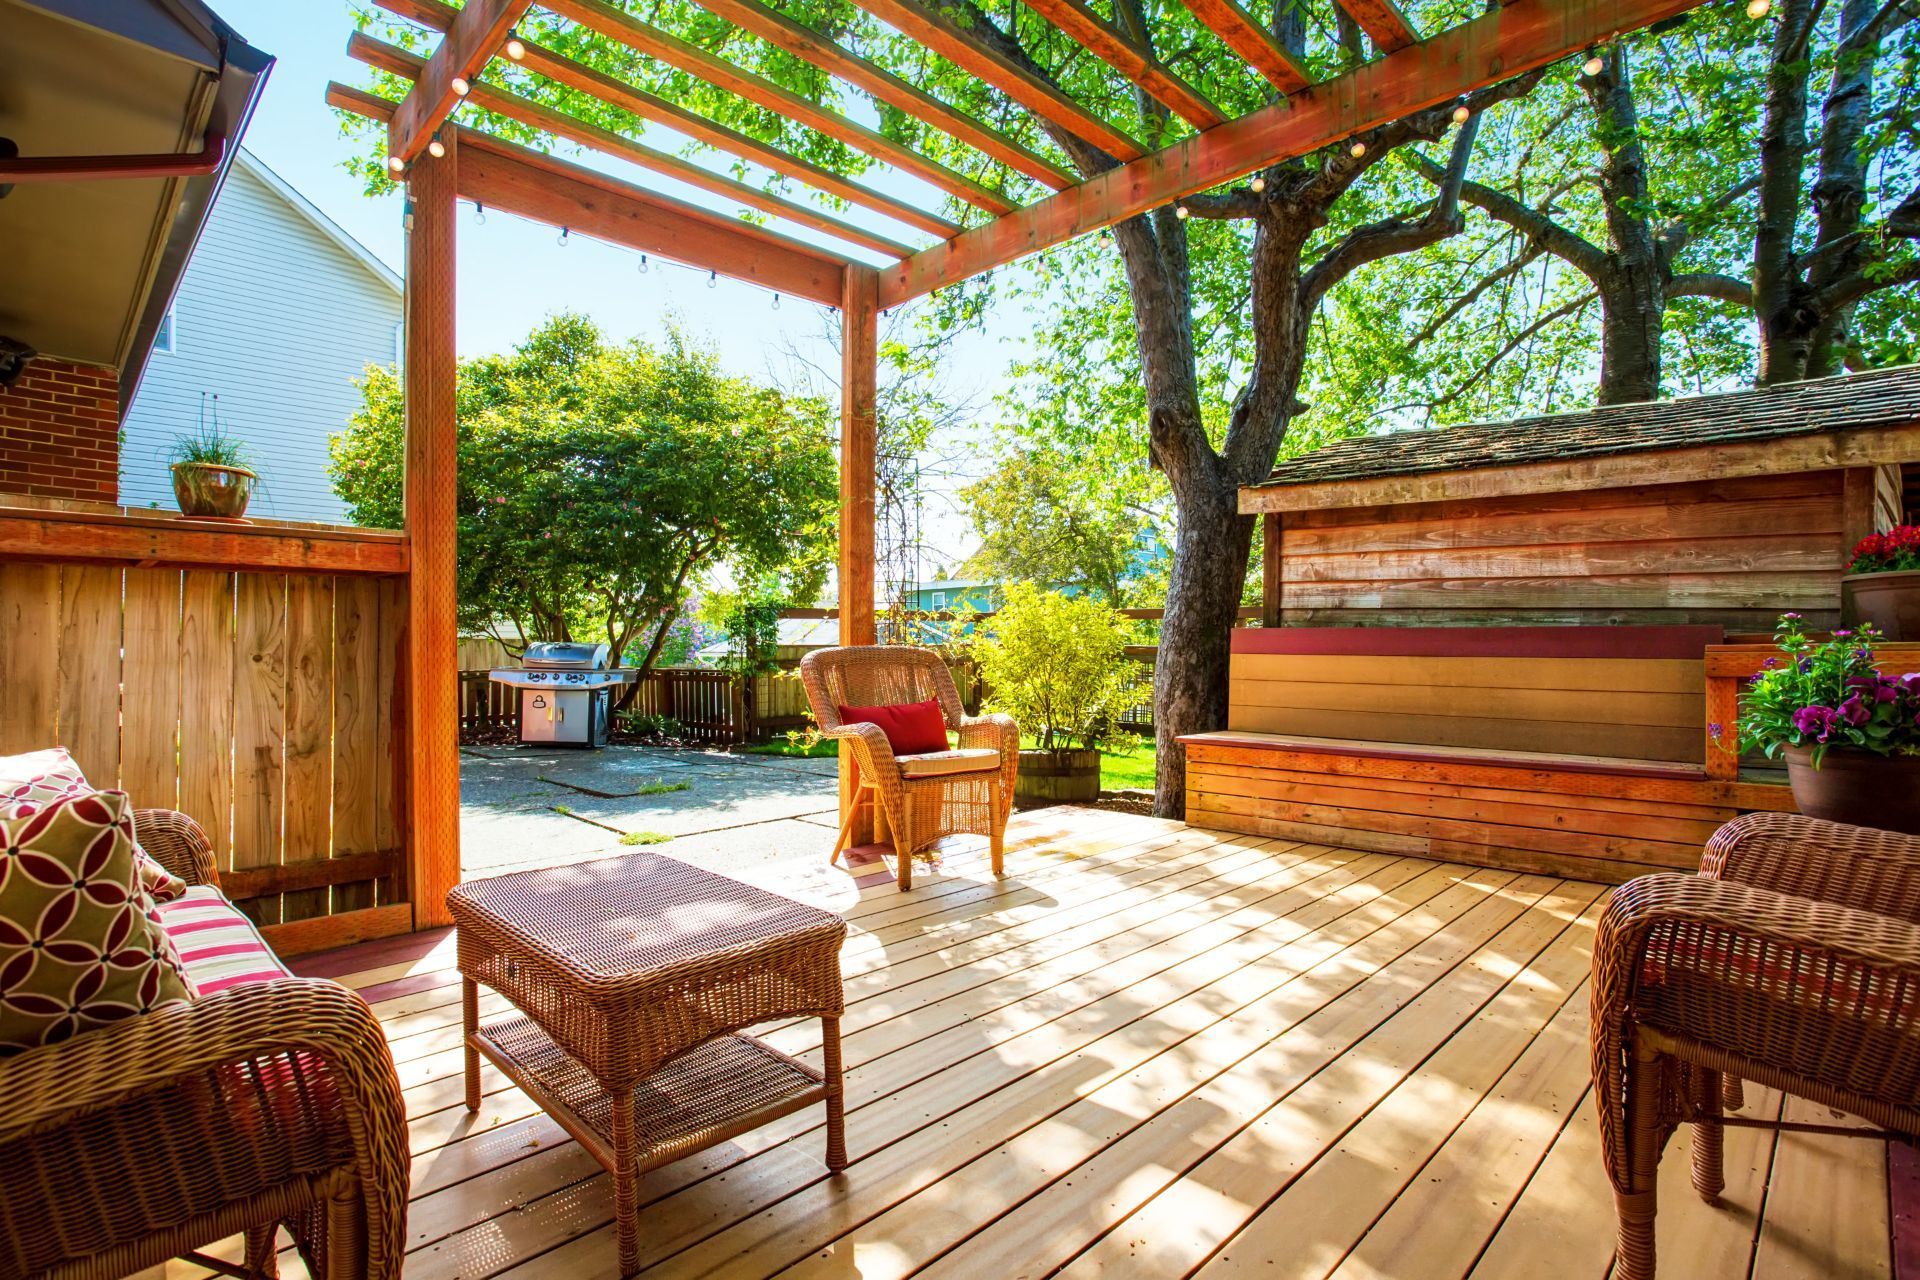 A cozy backyard deck in Chula Vista, CA, bathed in sunlight, features natural wood planks and a pergola with an open beam design. Rattan furniture with cushioned seats invites relaxation, while a built-in hot tub promises leisure. Lush greenery, including a mature tree, peeks over a high wooden fence, creating a private outdoor retreat. String lights dangle above, suggesting a warm ambiance for evenings, and vibrant potted flowers add a splash of color to the tranquil setting.